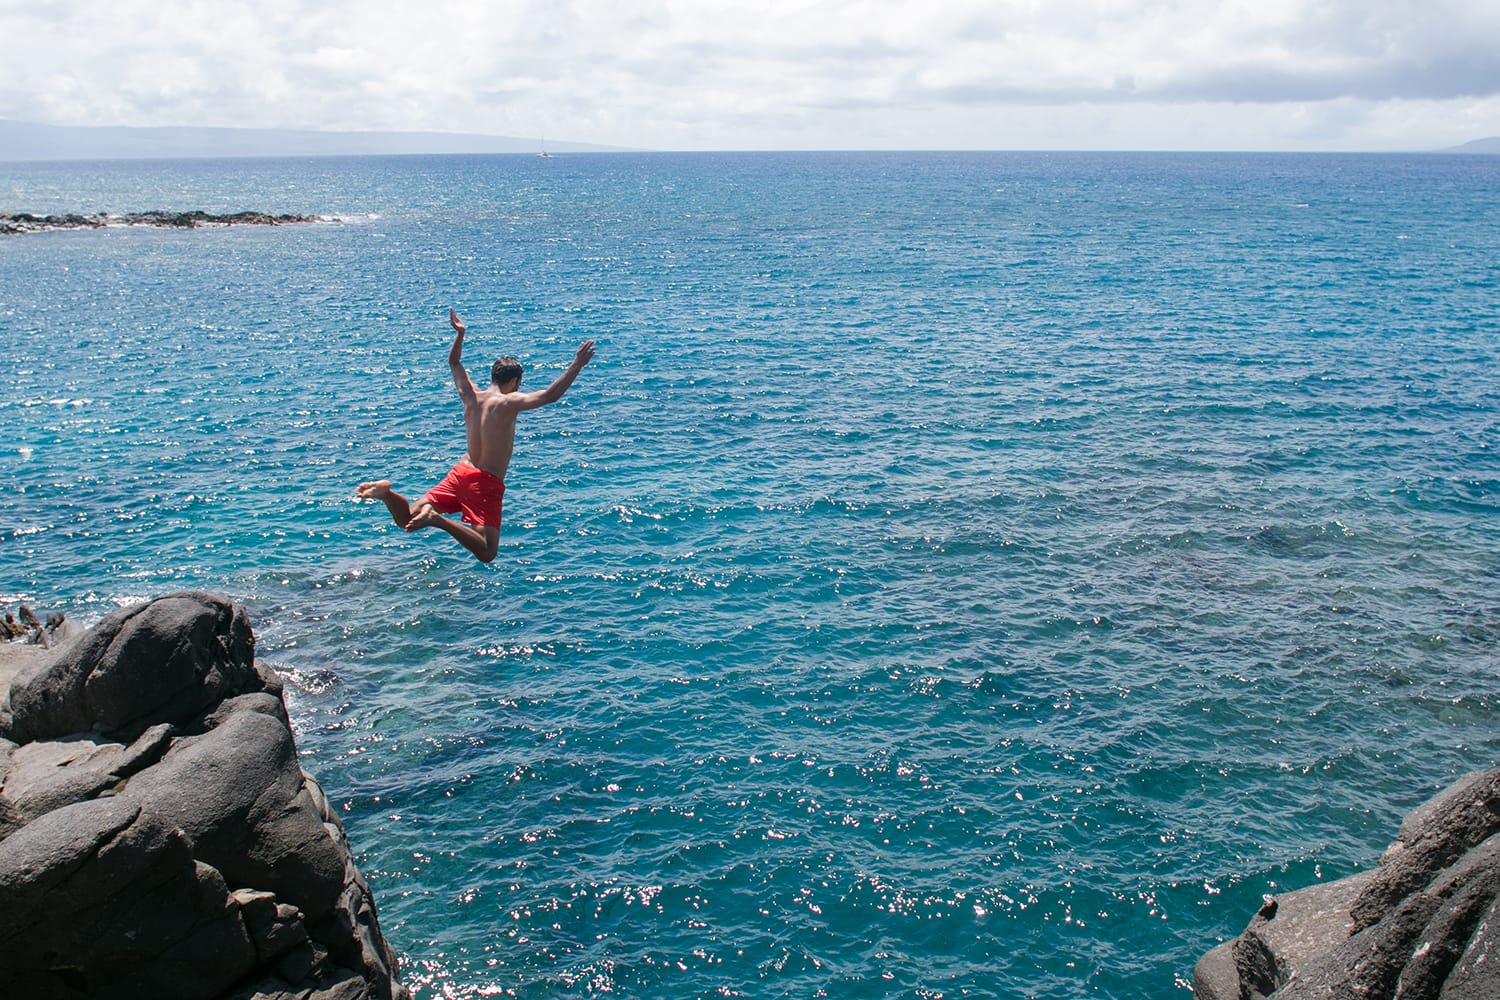 A man jumps off a cliff into the blue ocean in Maui, Hawaii